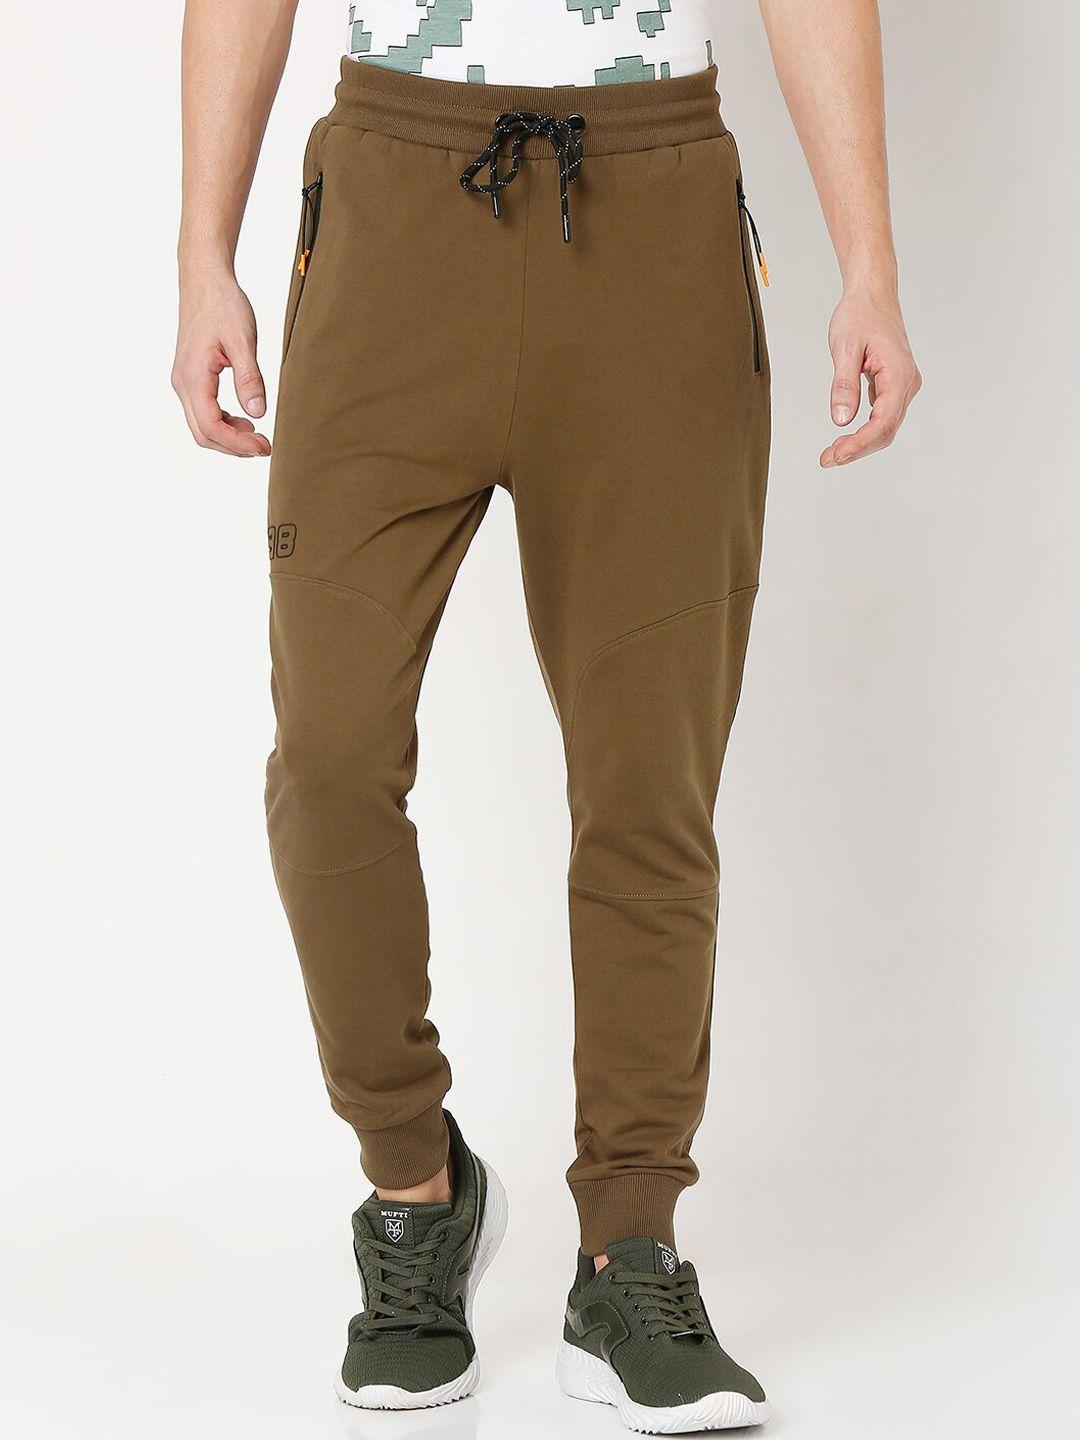 mufti-men-olive-green-loose-fit-joggers-trousers